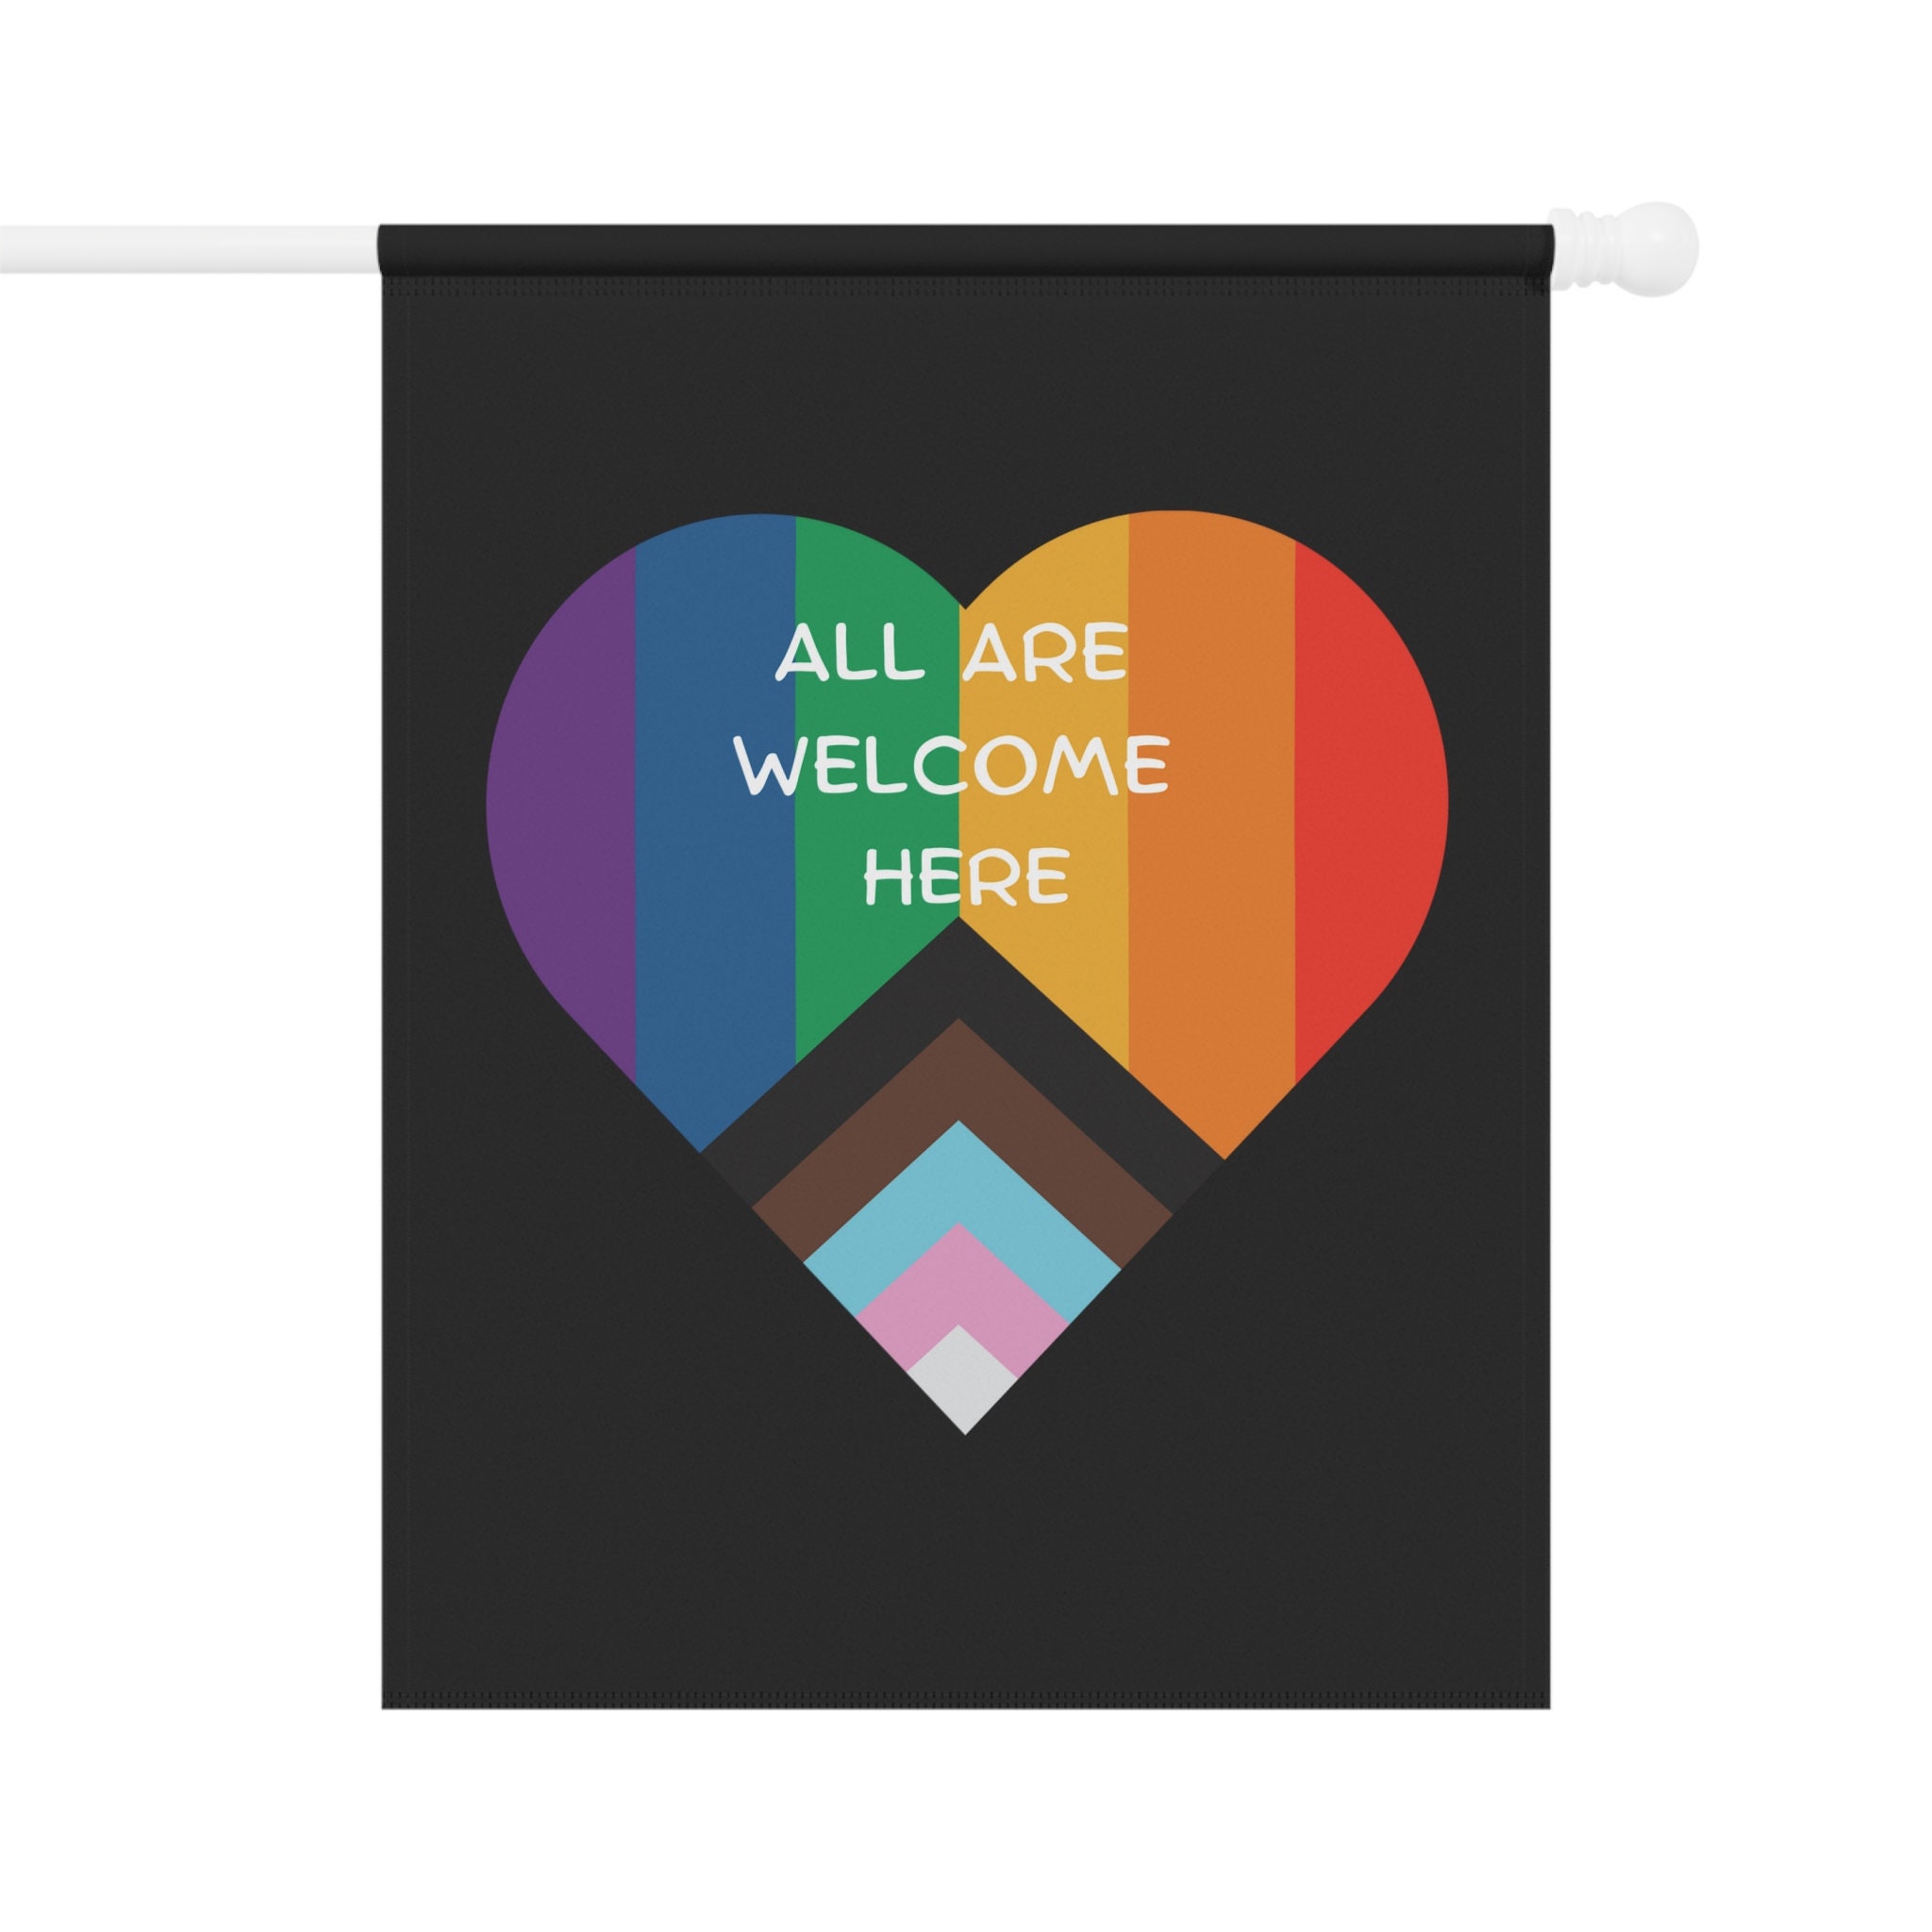 Discover All Are Welcome Here Rainbow Heart Diversity Garden Flag Inclusive House Banner LGBTQ Pride Outdoor Decor Liberal Yard Flag Gay Pride